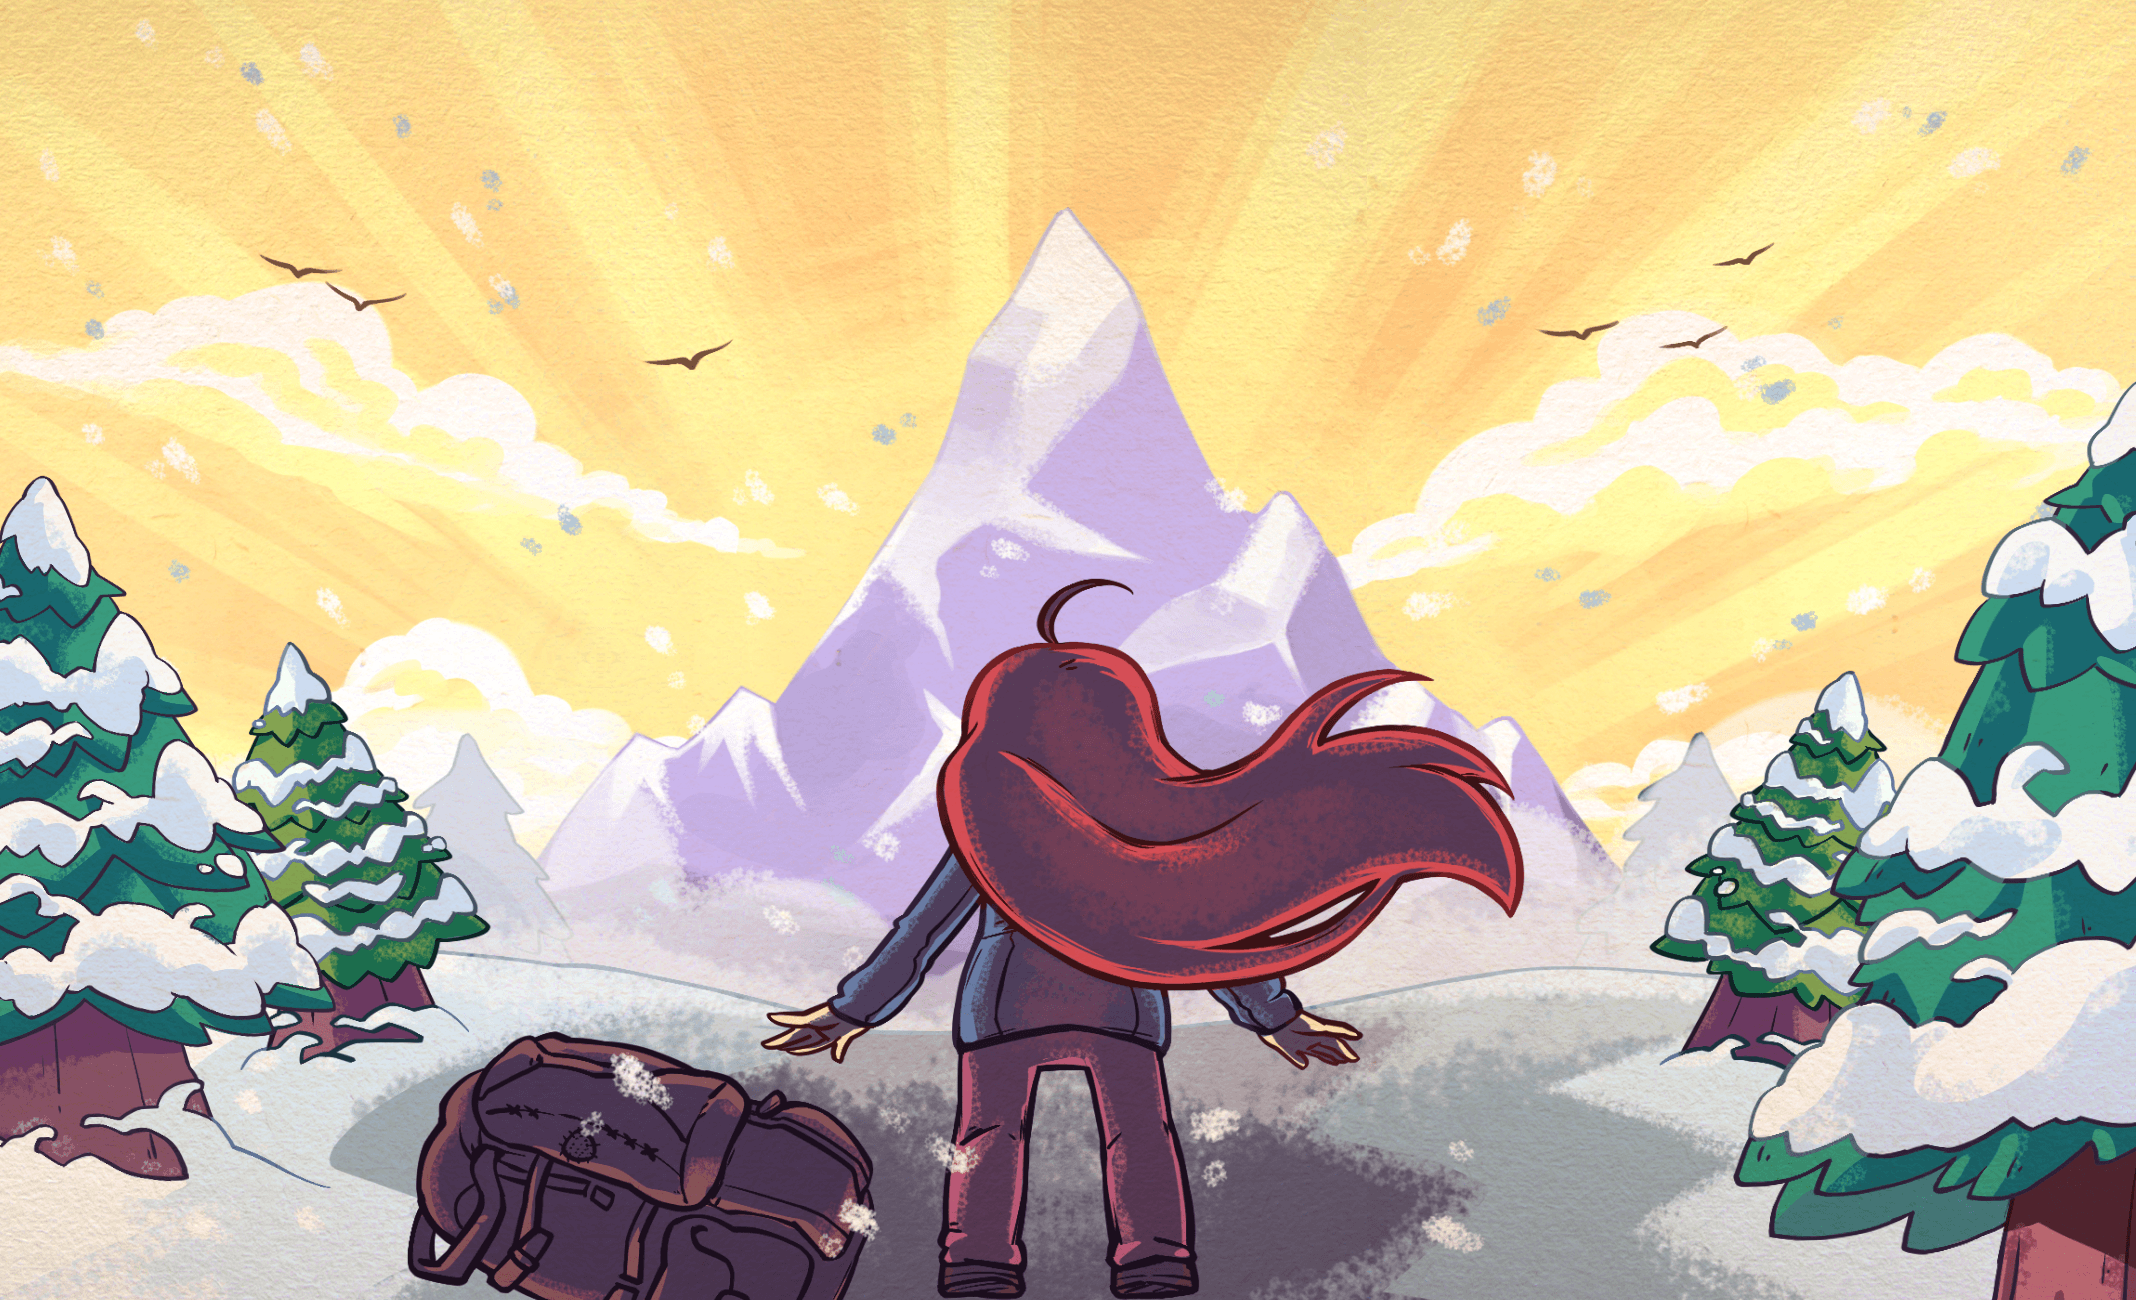 Celeste Wallpapers 1920x1080 complete pack